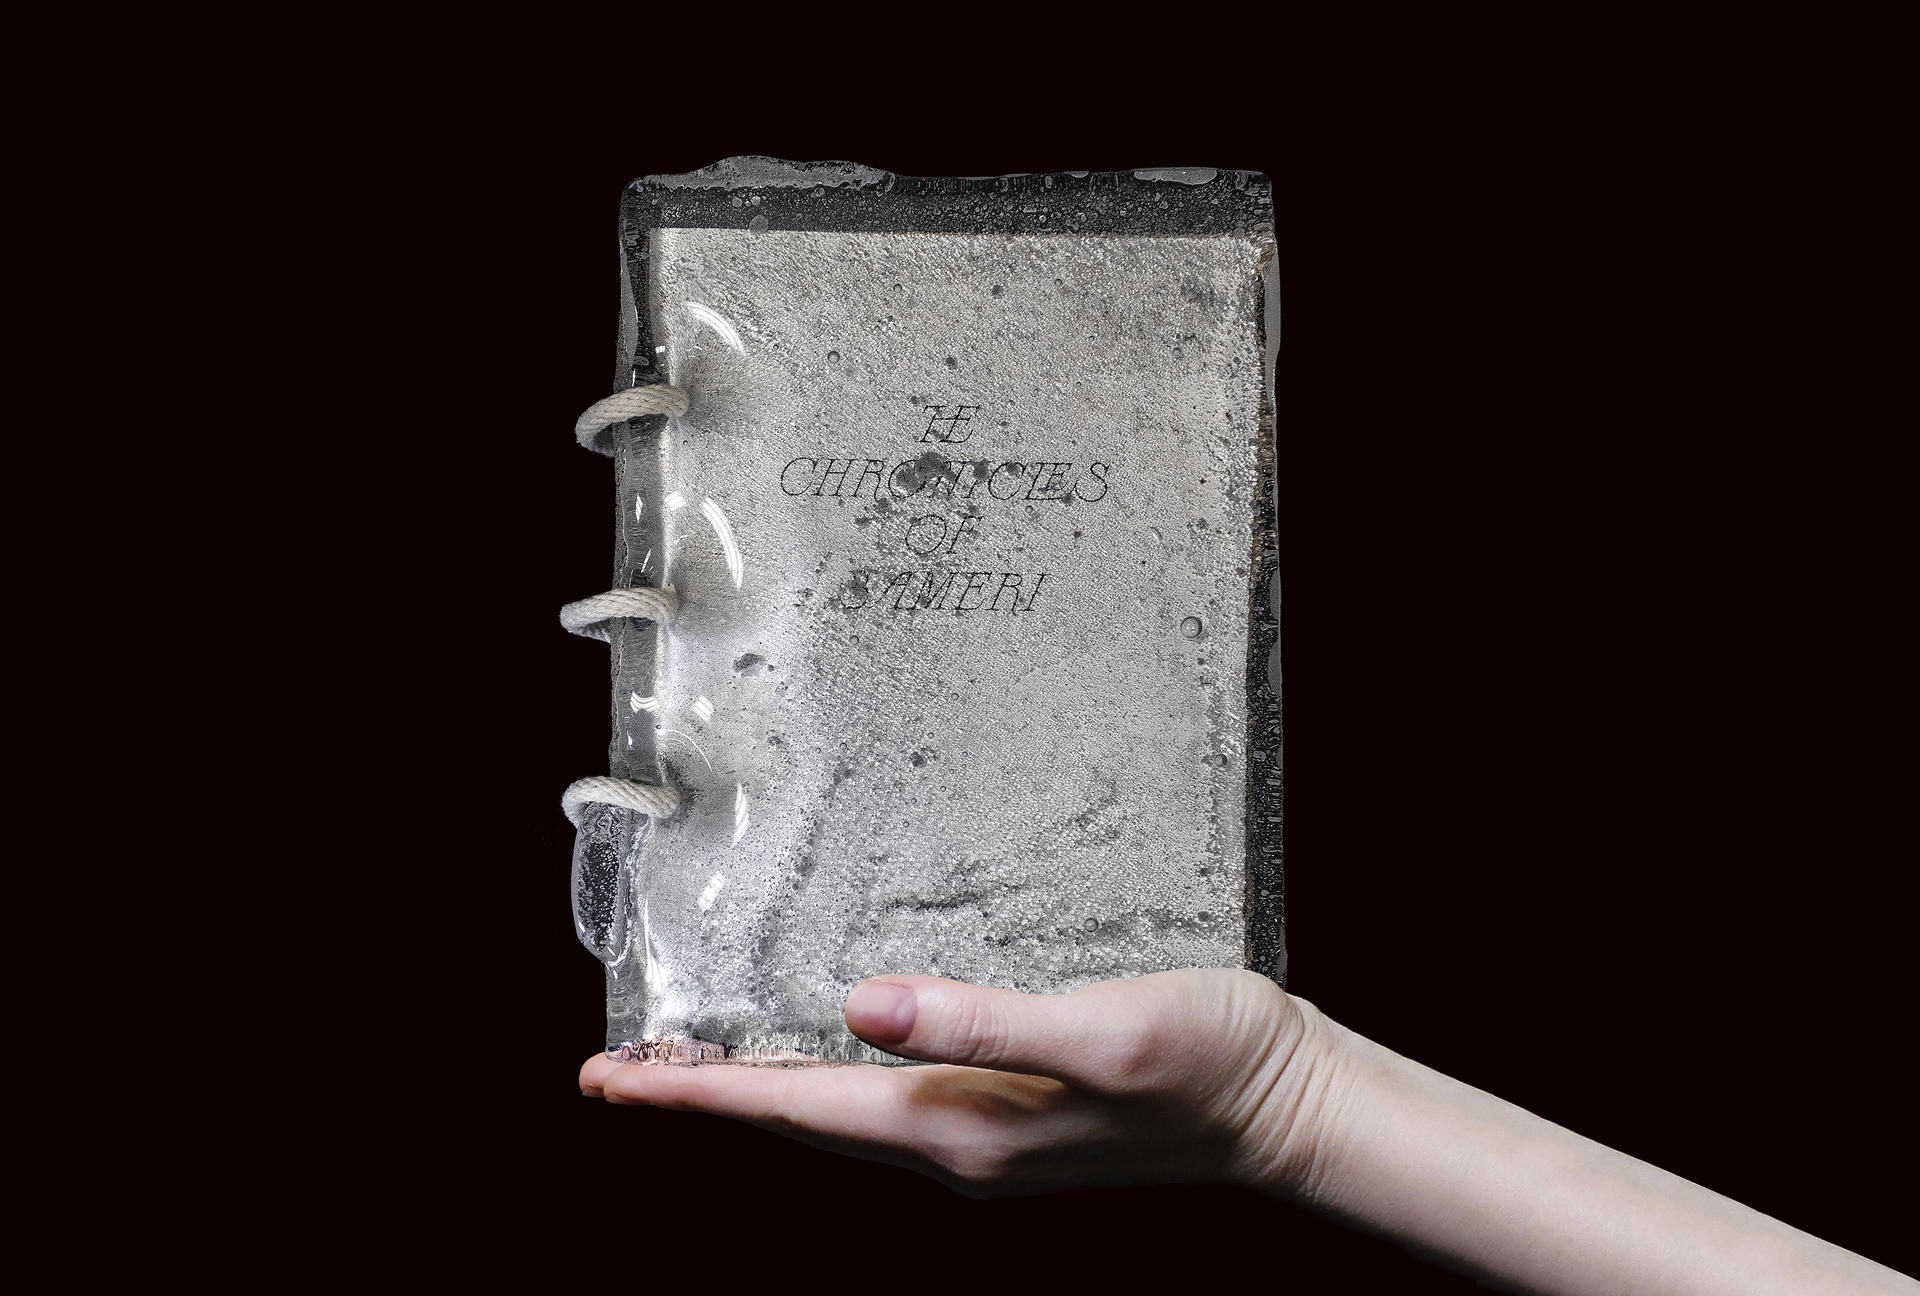 A hand holding a book with thick glass cover and rope binding.